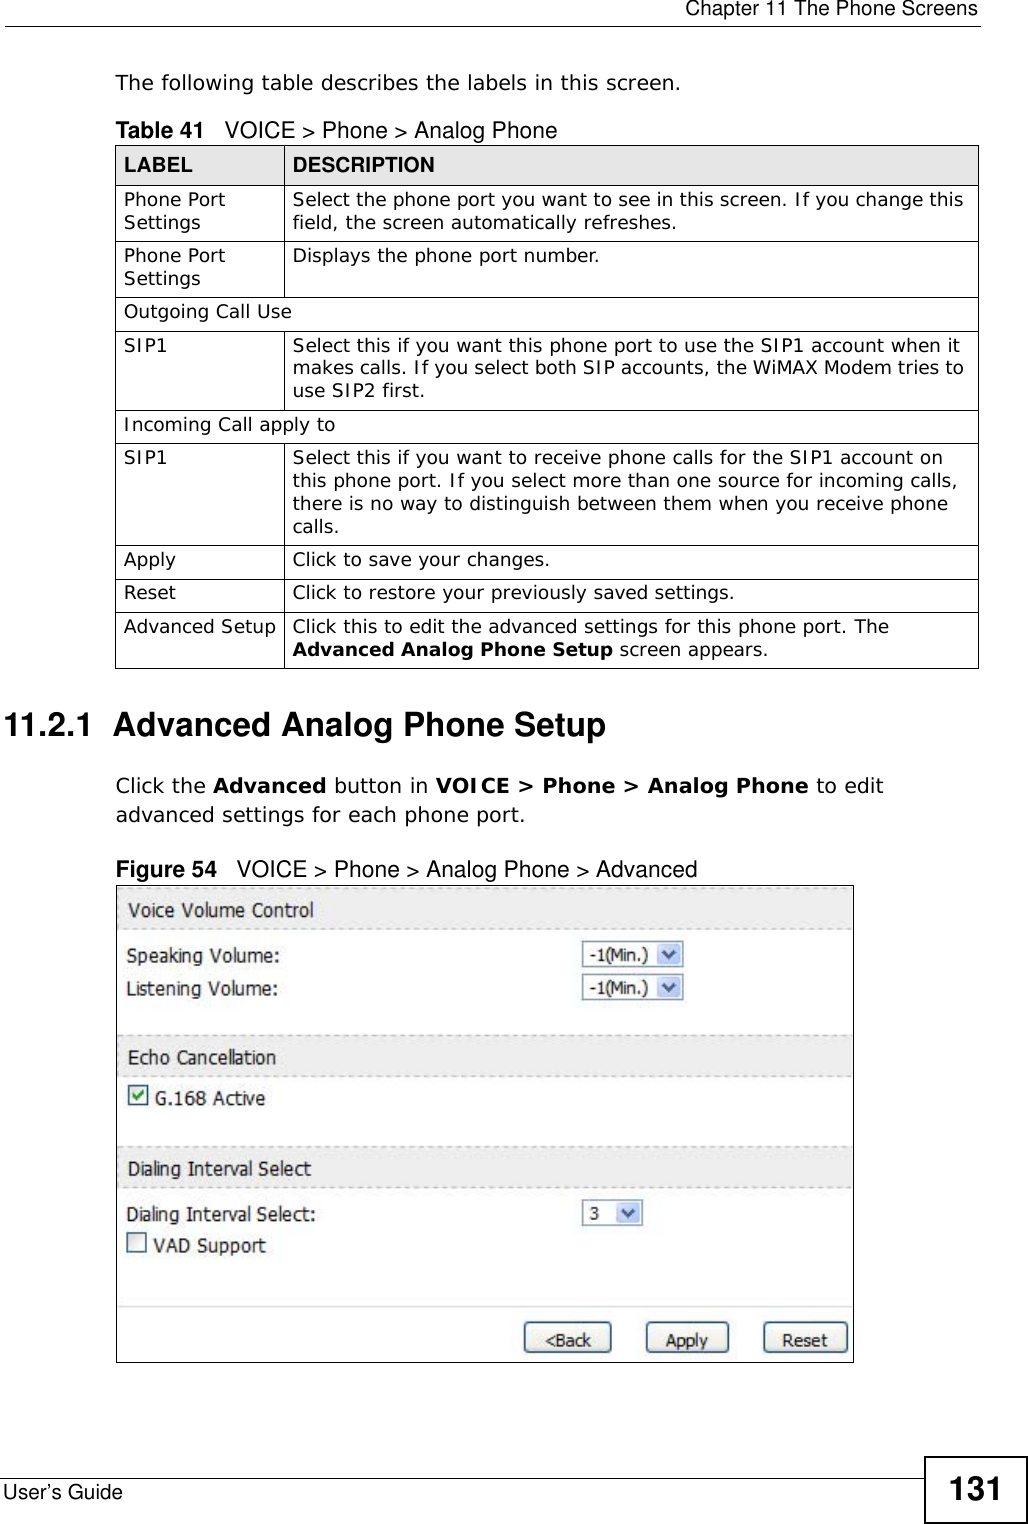  Chapter 11 The Phone ScreensUser’s Guide 131The following table describes the labels in this screen.11.2.1  Advanced Analog Phone SetupClick the Advanced button in VOICE &gt; Phone &gt; Analog Phone to edit advanced settings for each phone port.Figure 54   VOICE &gt; Phone &gt; Analog Phone &gt; AdvancedTable 41   VOICE &gt; Phone &gt; Analog PhoneLABEL DESCRIPTIONPhone Port Settings Select the phone port you want to see in this screen. If you change this field, the screen automatically refreshes.Phone Port Settings Displays the phone port number.Outgoing Call UseSIP1 Select this if you want this phone port to use the SIP1 account when it makes calls. If you select both SIP accounts, the WiMAX Modem tries to use SIP2 first.Incoming Call apply toSIP1 Select this if you want to receive phone calls for the SIP1 account on this phone port. If you select more than one source for incoming calls, there is no way to distinguish between them when you receive phone calls.Apply Click to save your changes.Reset Click to restore your previously saved settings.Advanced Setup Click this to edit the advanced settings for this phone port. The Advanced Analog Phone Setup screen appears.